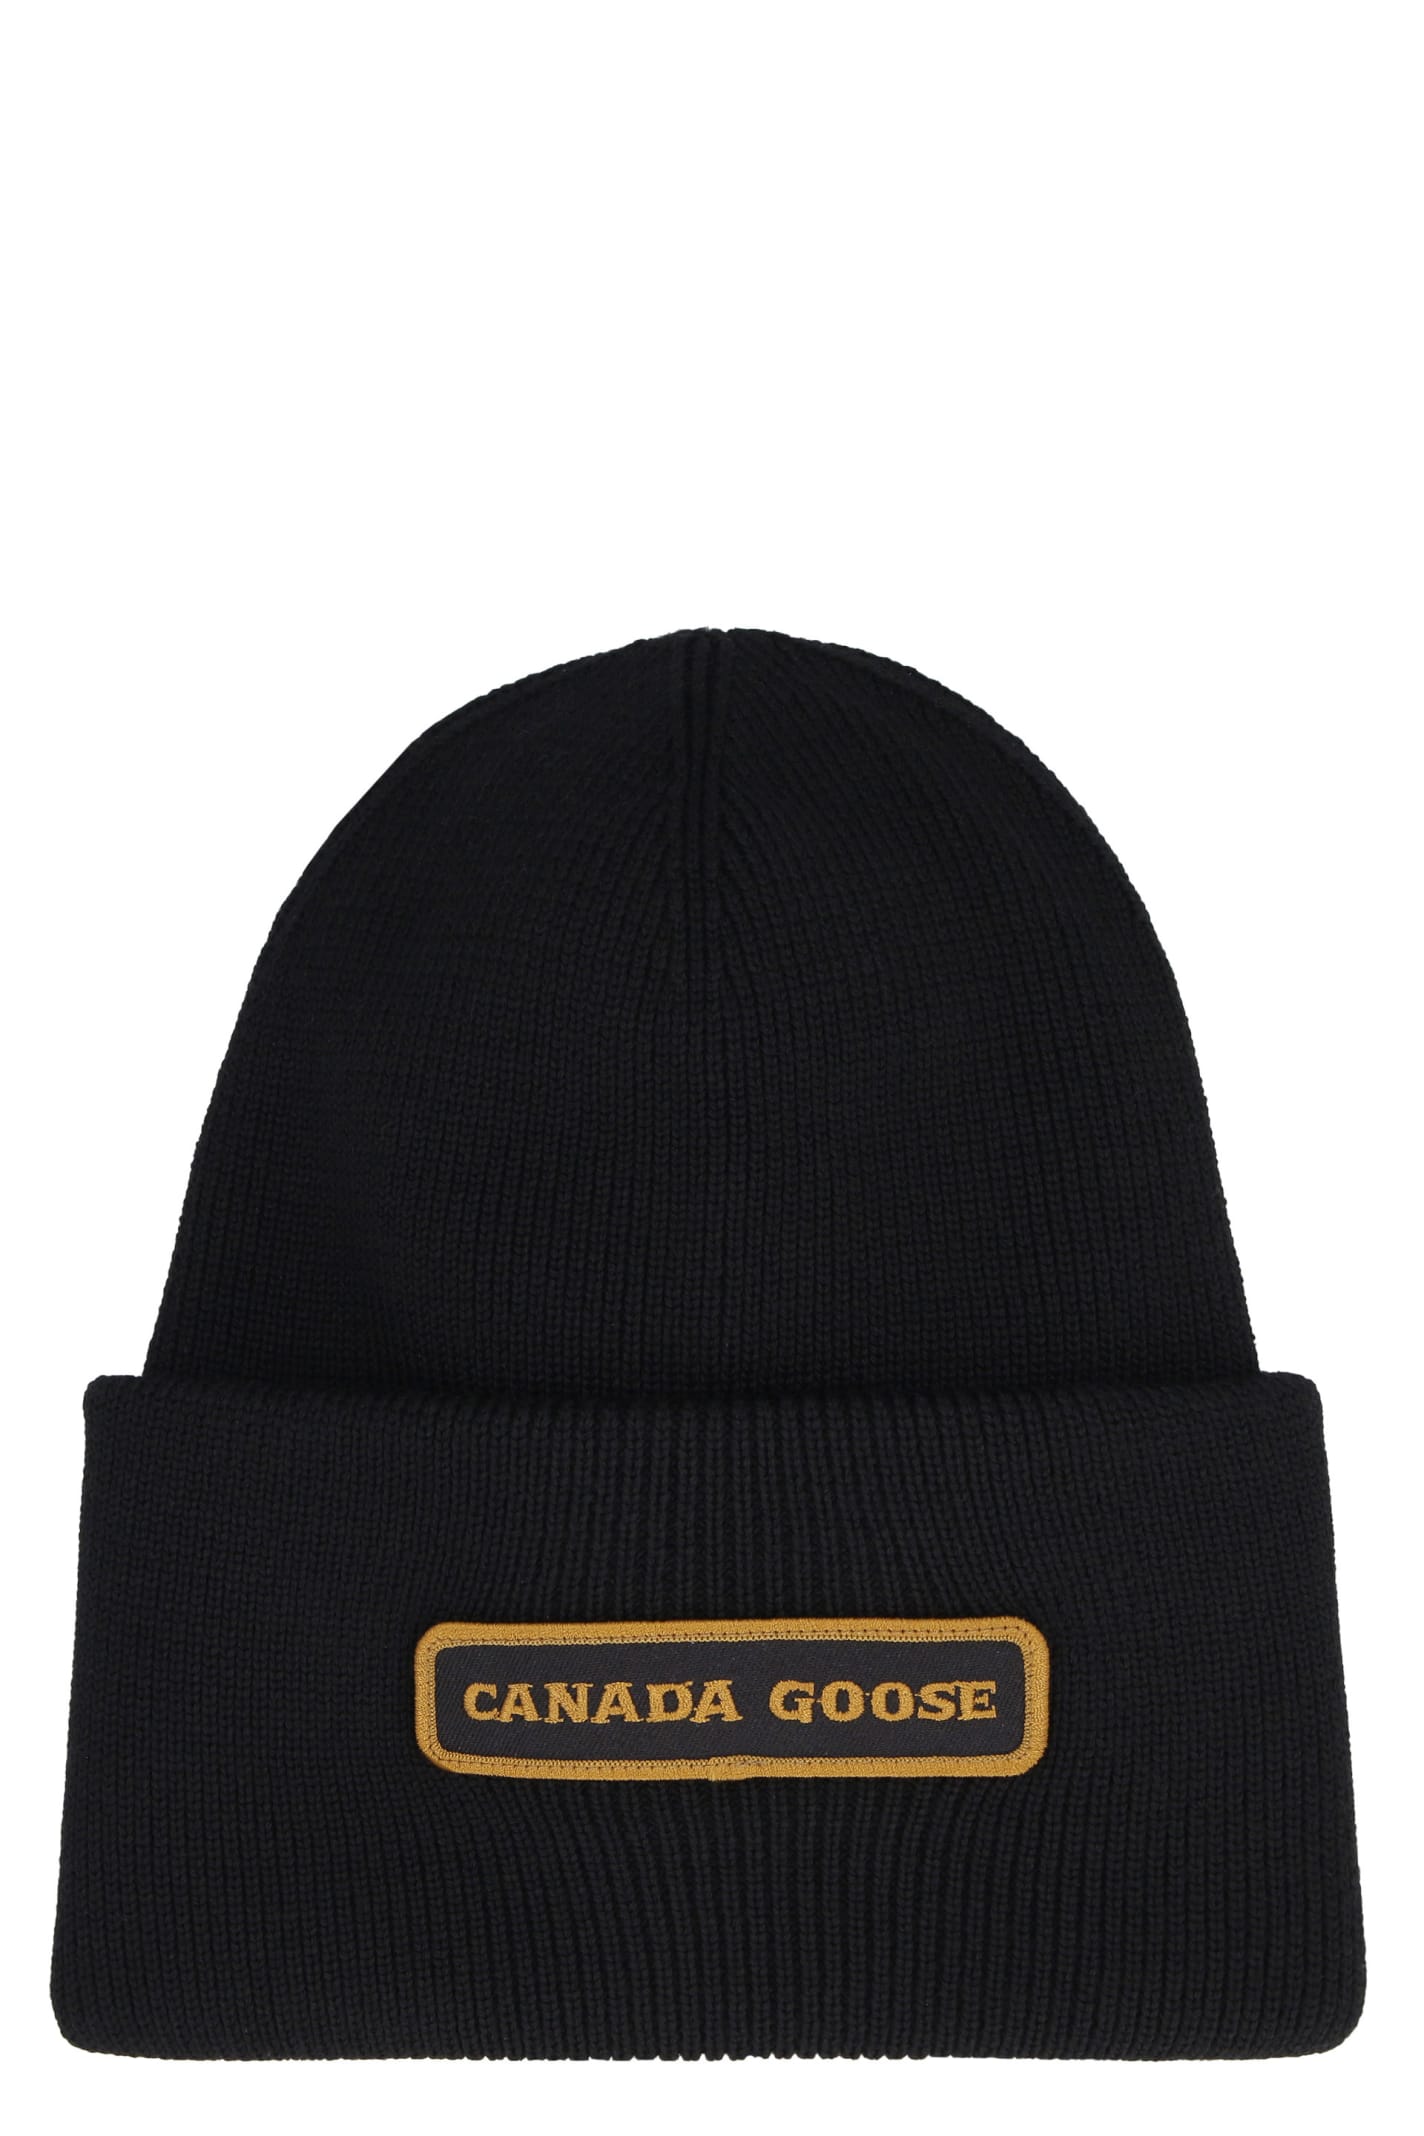 Canada Goose Wool Hat